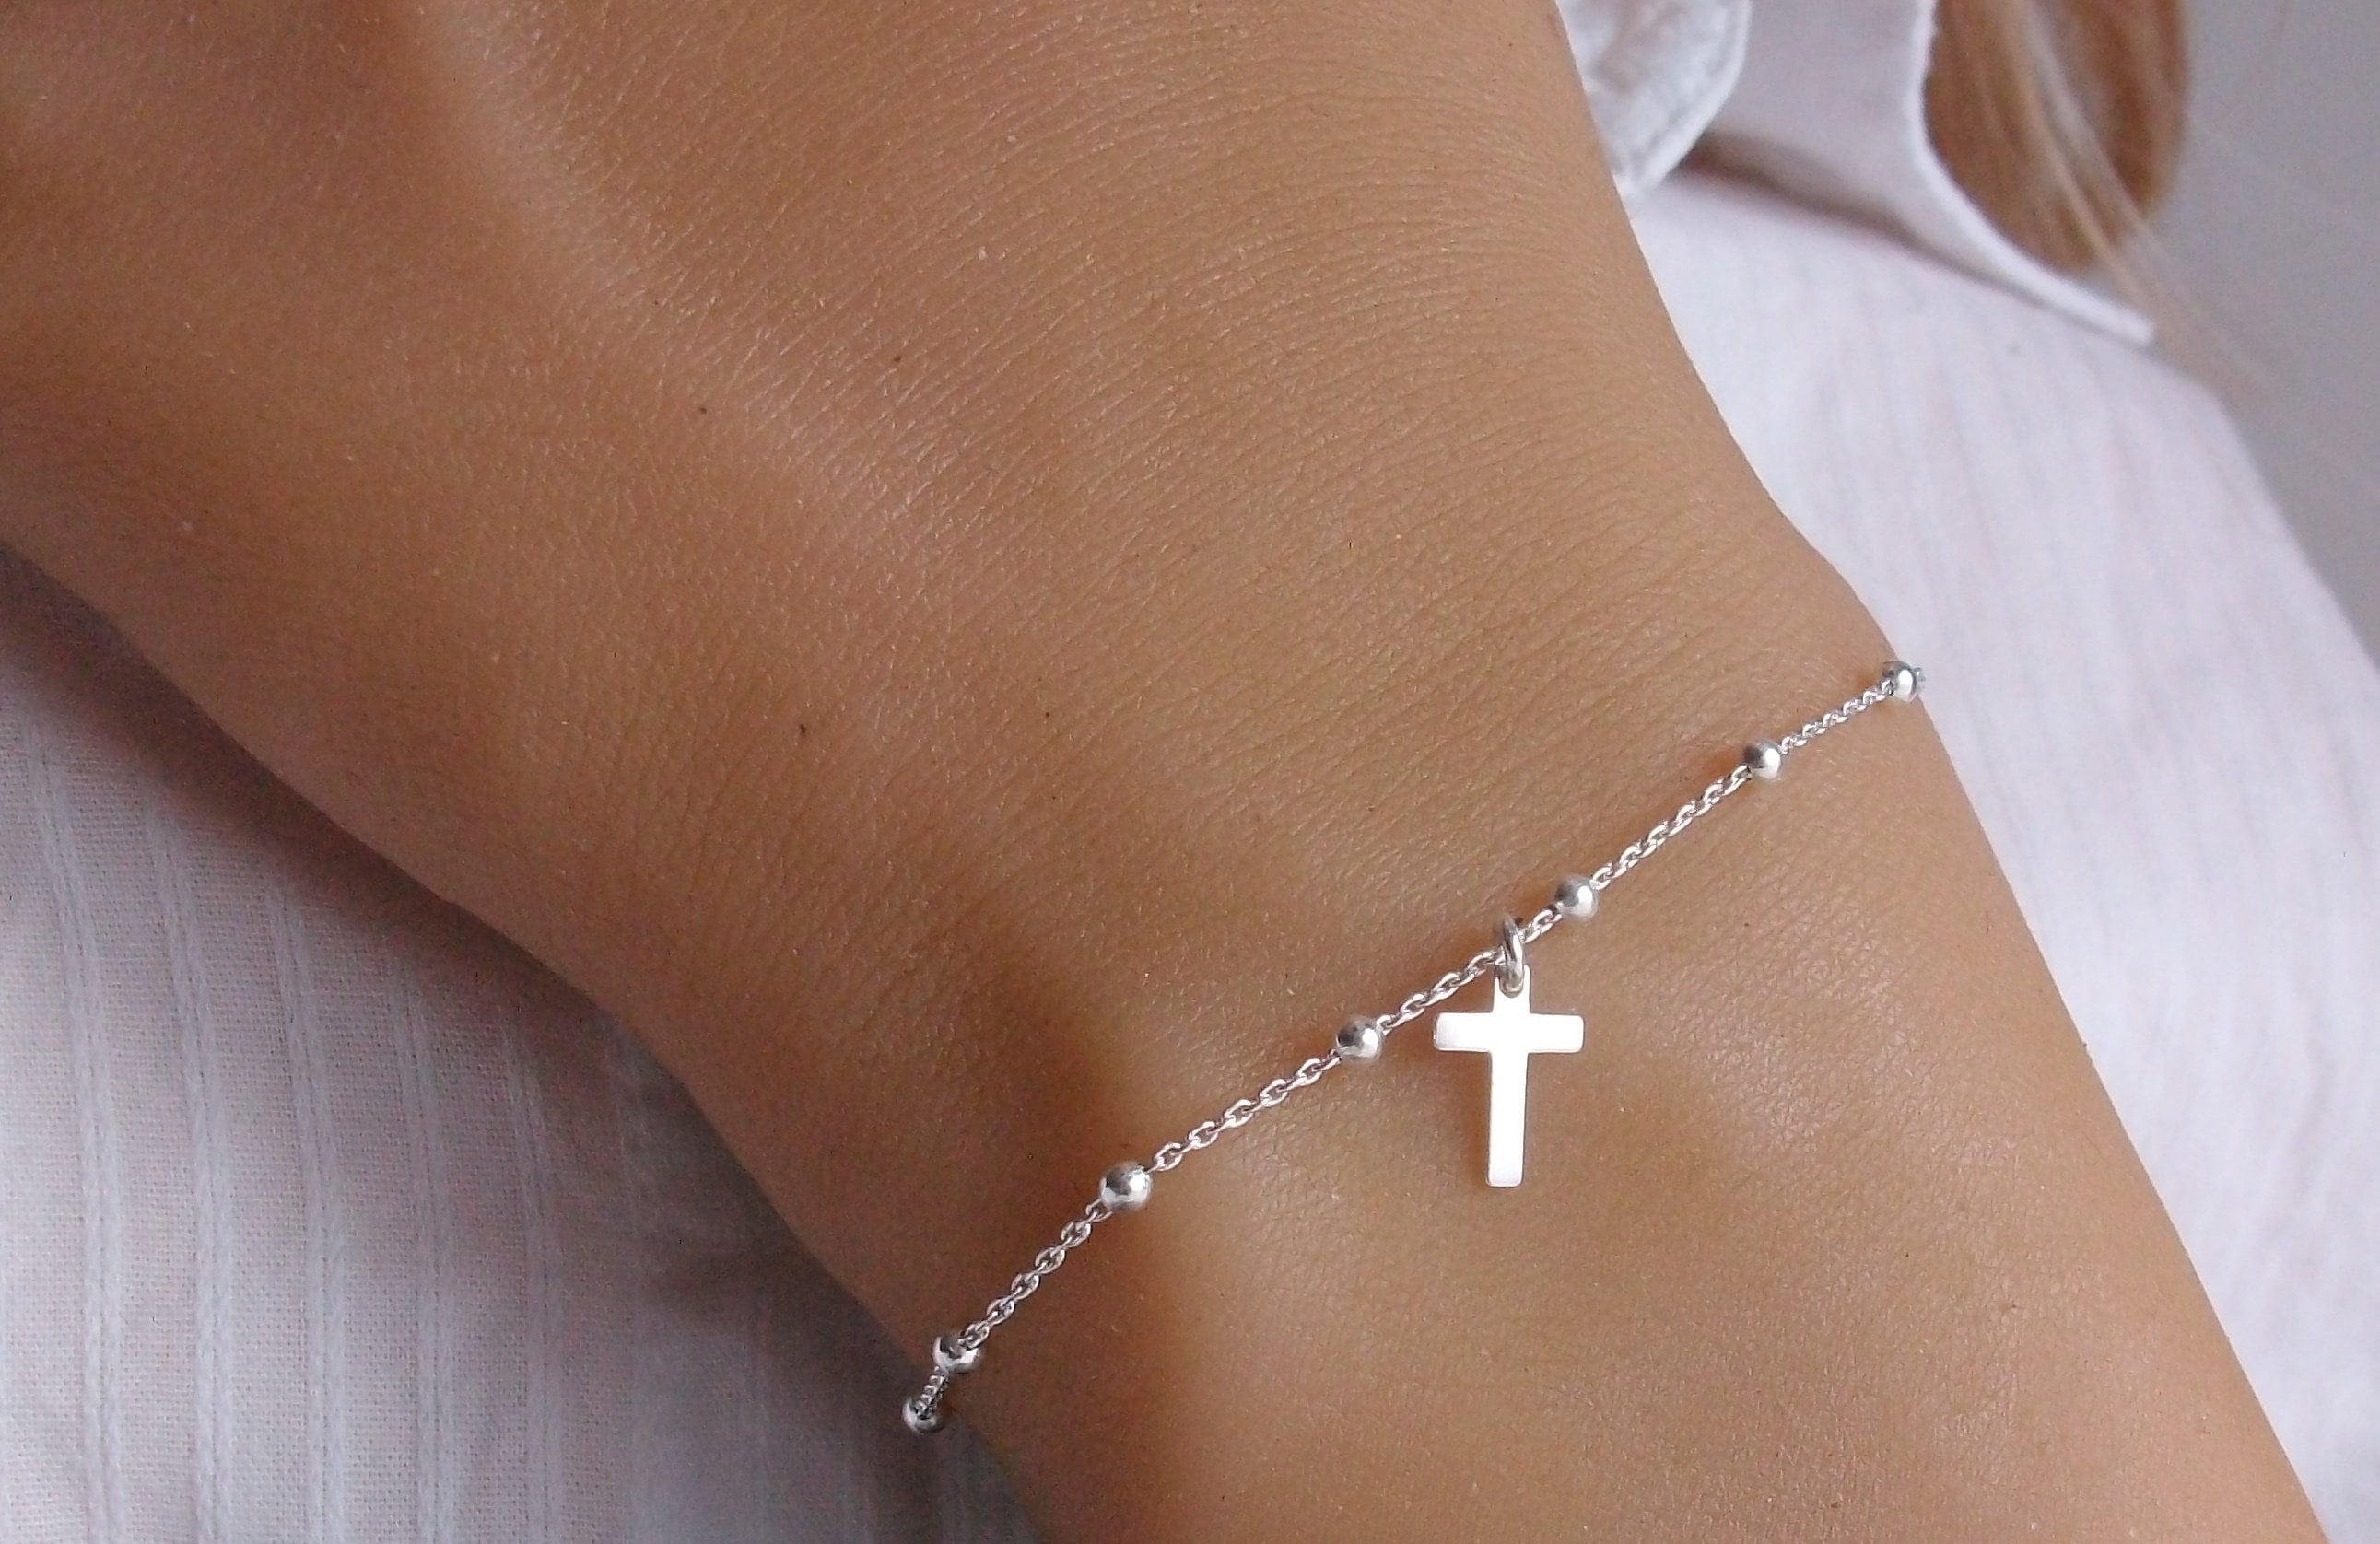 30pcs Silver Small Cross Alloy Pendant Mini Cross Charms Variety Cross Beads for Bracelets Craft 1 inch Vintage Cross Pendant Jewelry Making for